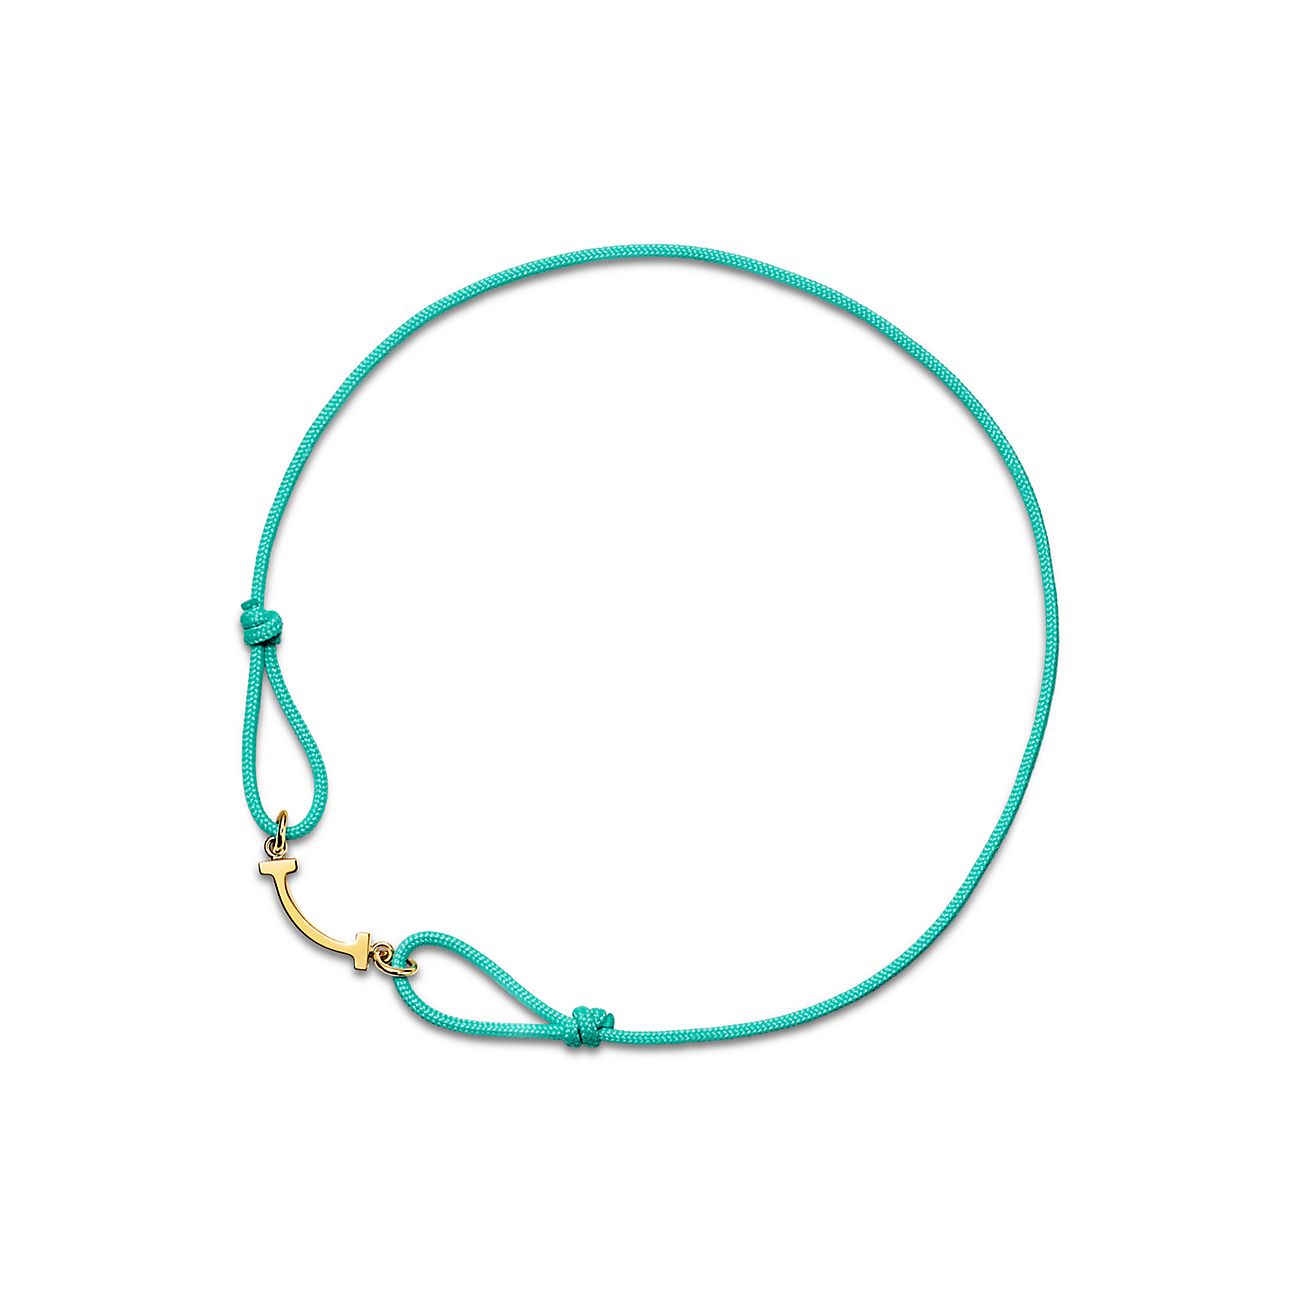 Tiffany T Smile Bracelet in Yellow Gold on a Blue Cord | Tiffany & Co.